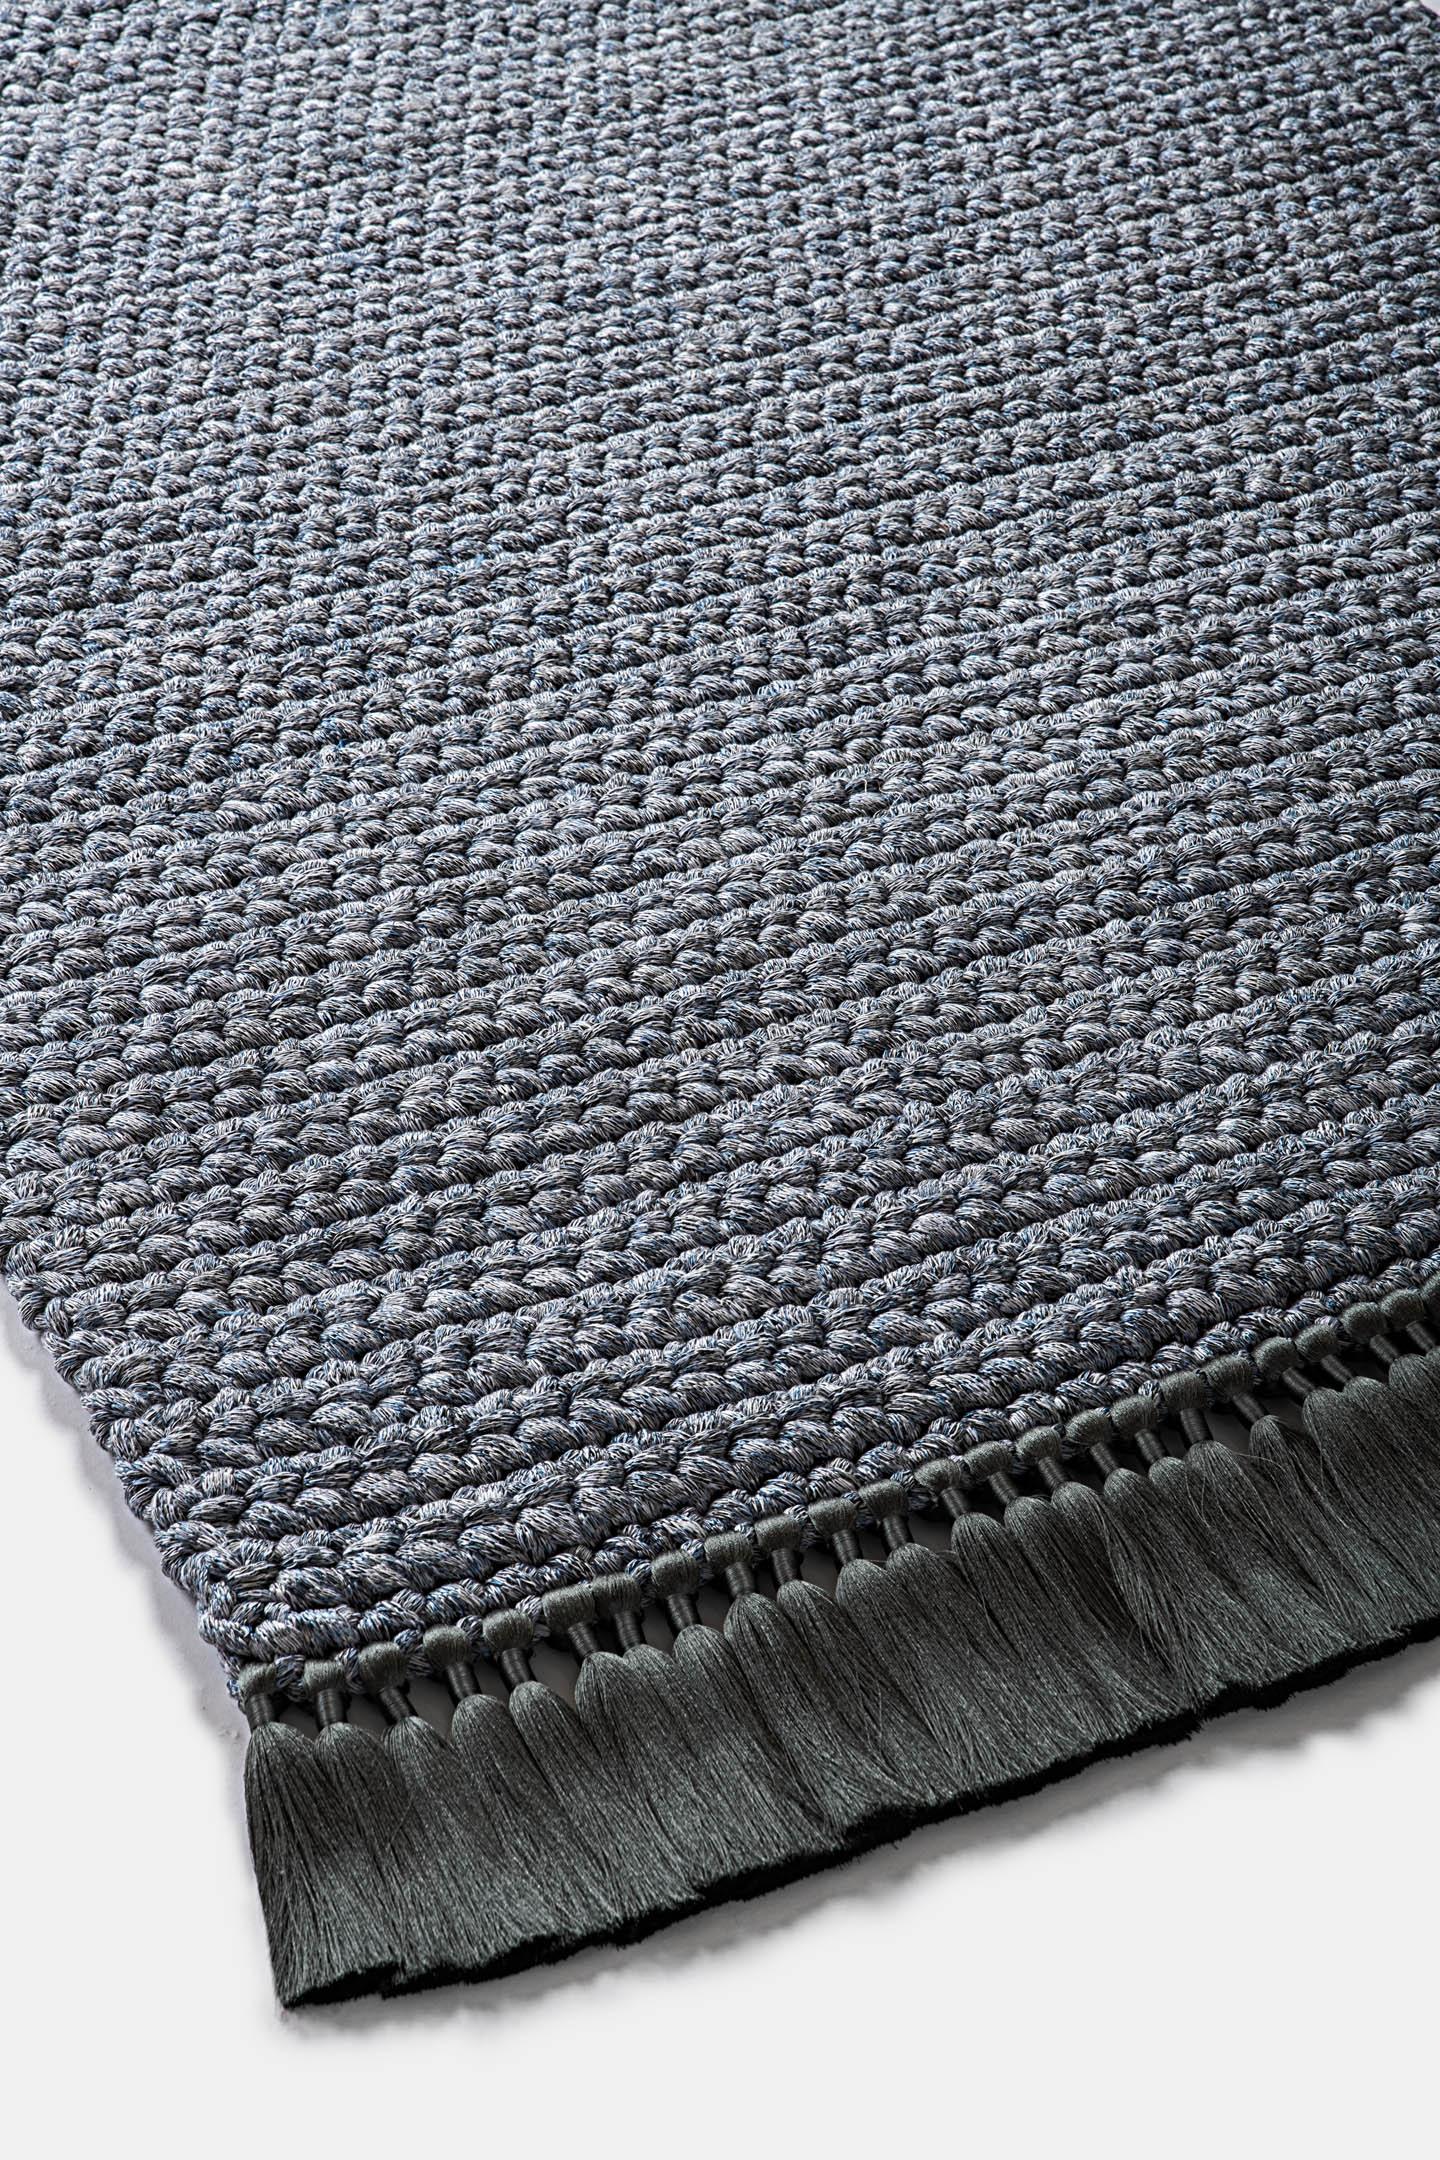 Handmade Crochet Thick Rug in Blue Grey Made of Cotton & Polyester by Iota In New Condition For Sale In Tel Aviv, IL